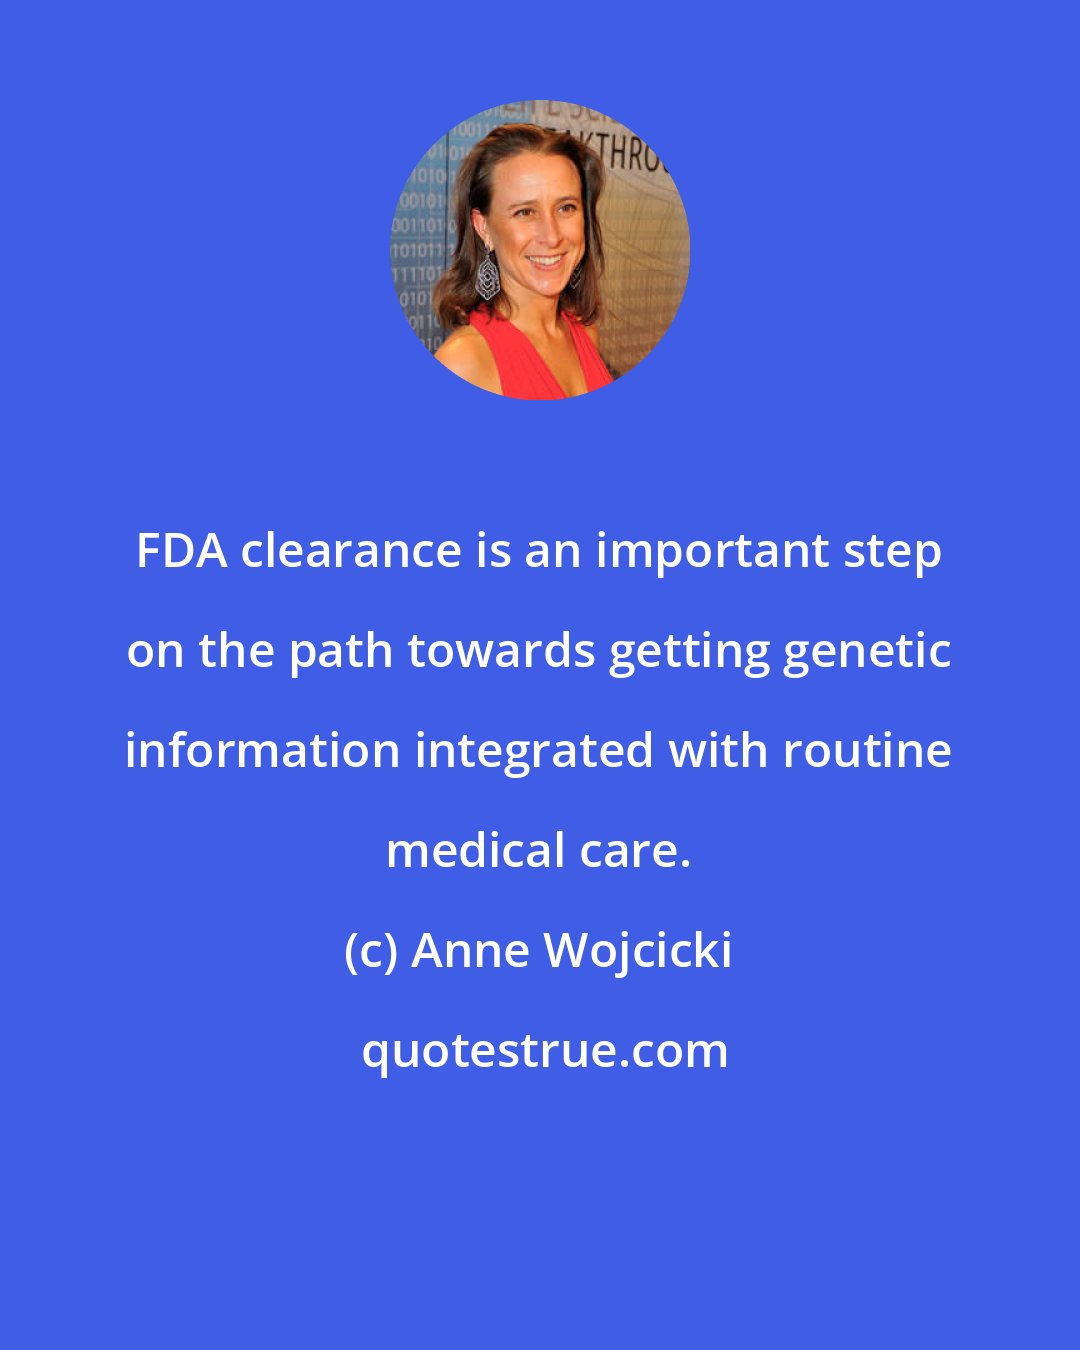 Anne Wojcicki: FDA clearance is an important step on the path towards getting genetic information integrated with routine medical care.